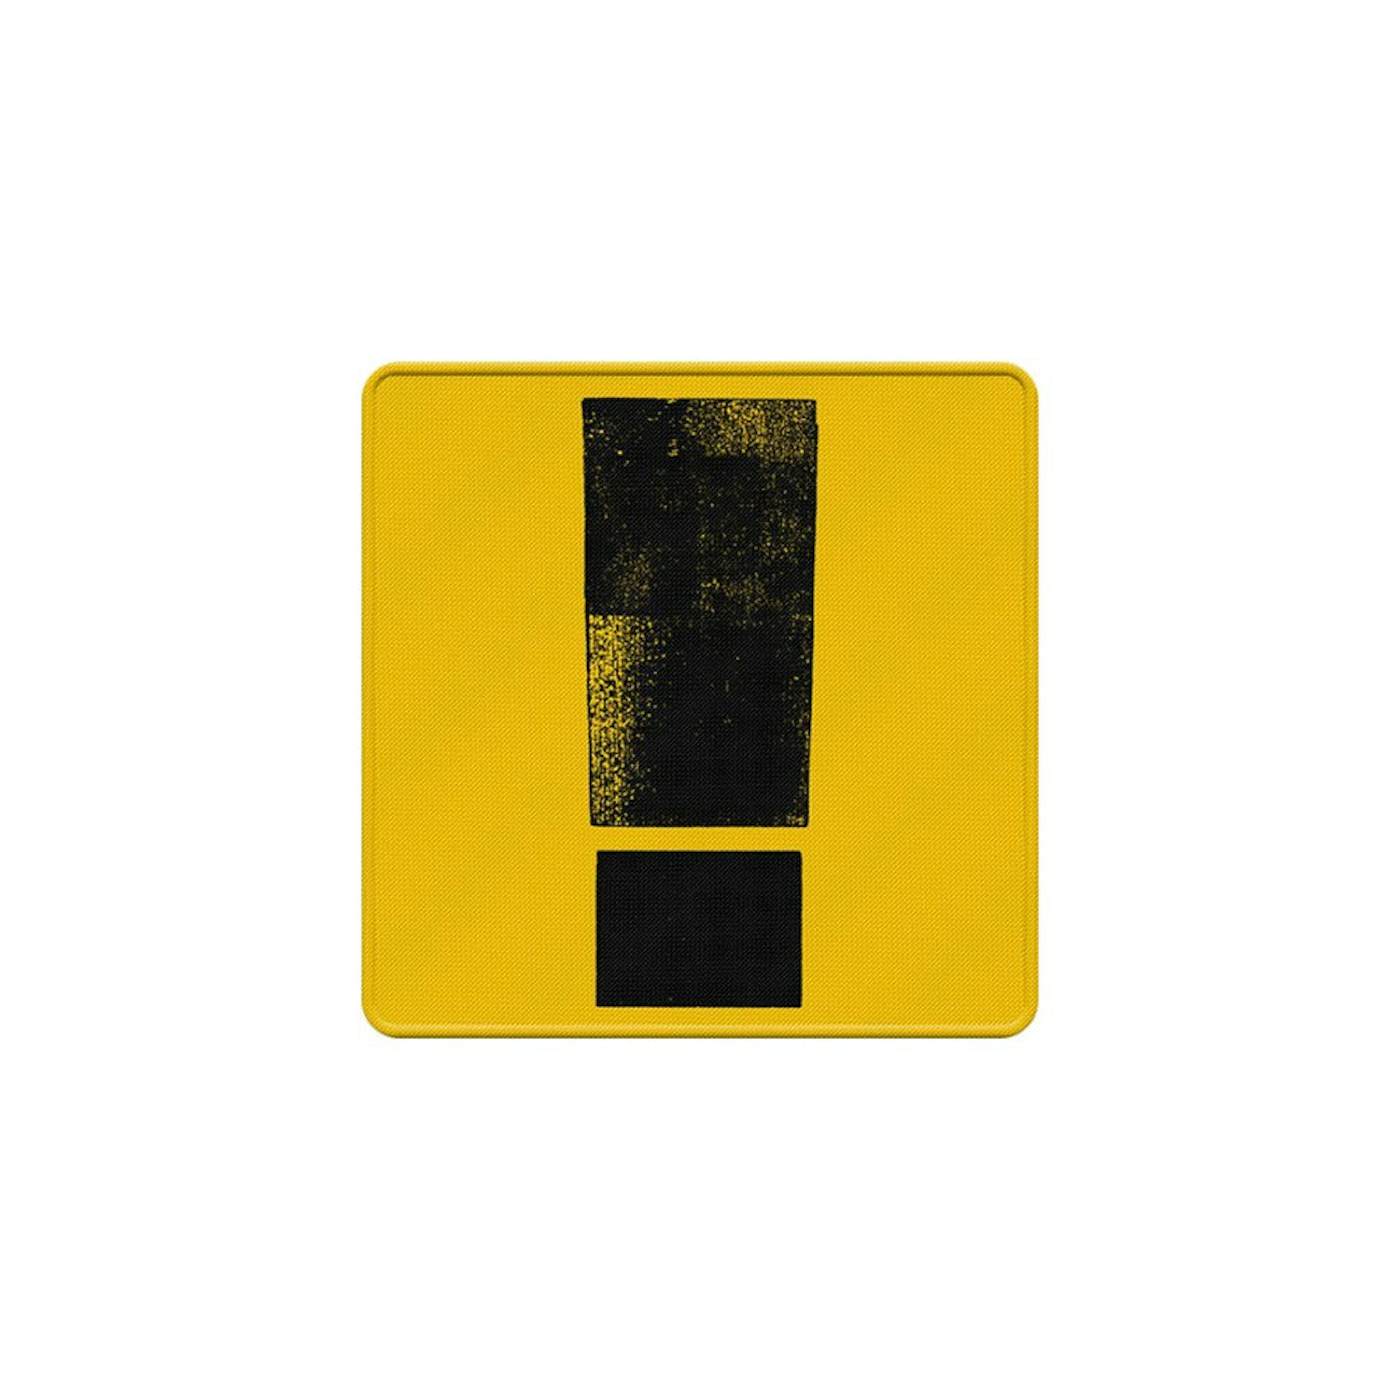 Shinedown Attention Attention Patch